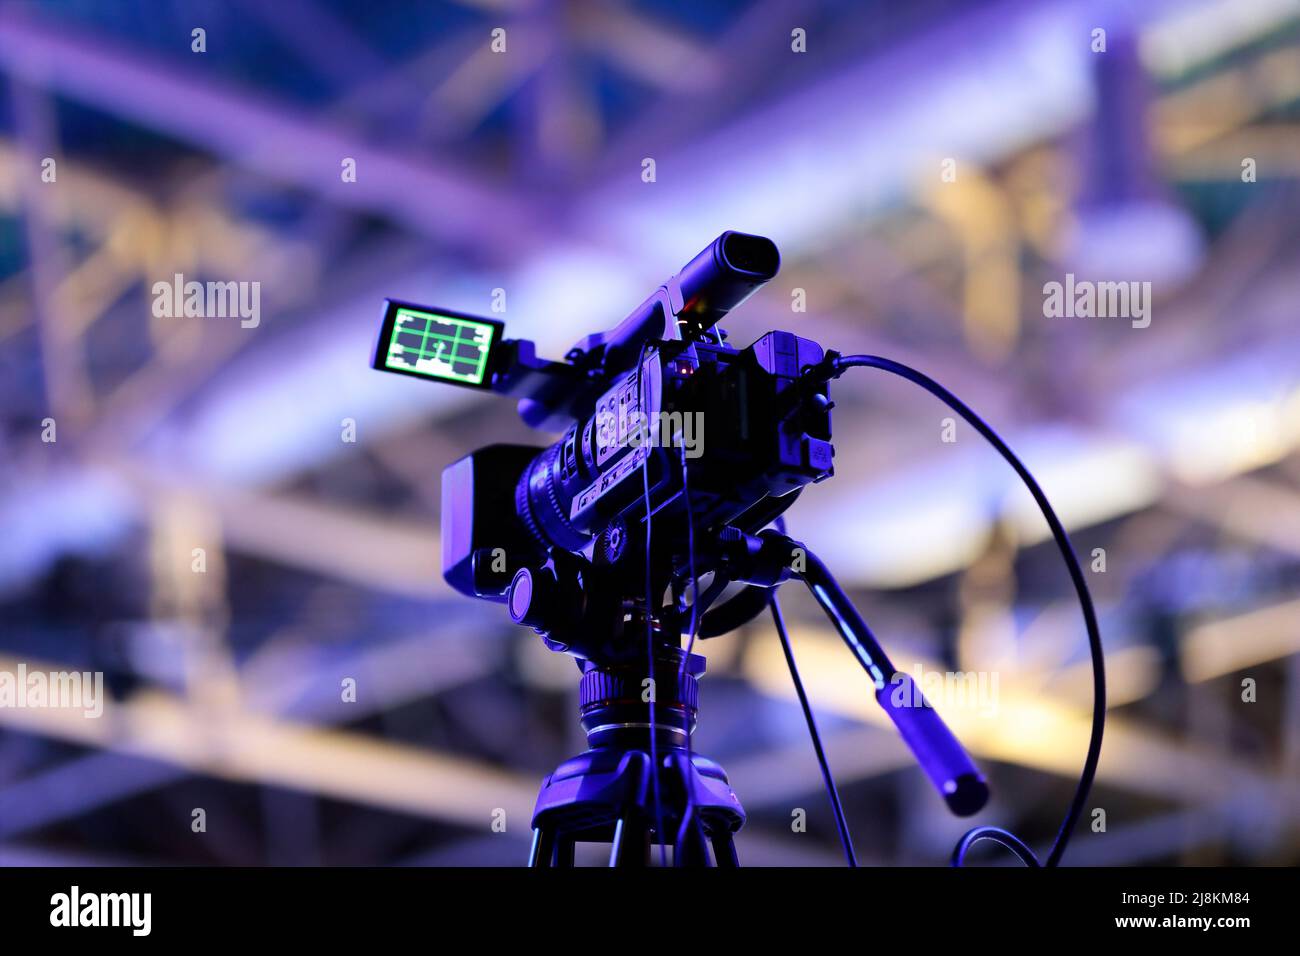 Professional television camera on a tripod during live broadcasting. Selective focus. Stock Photo